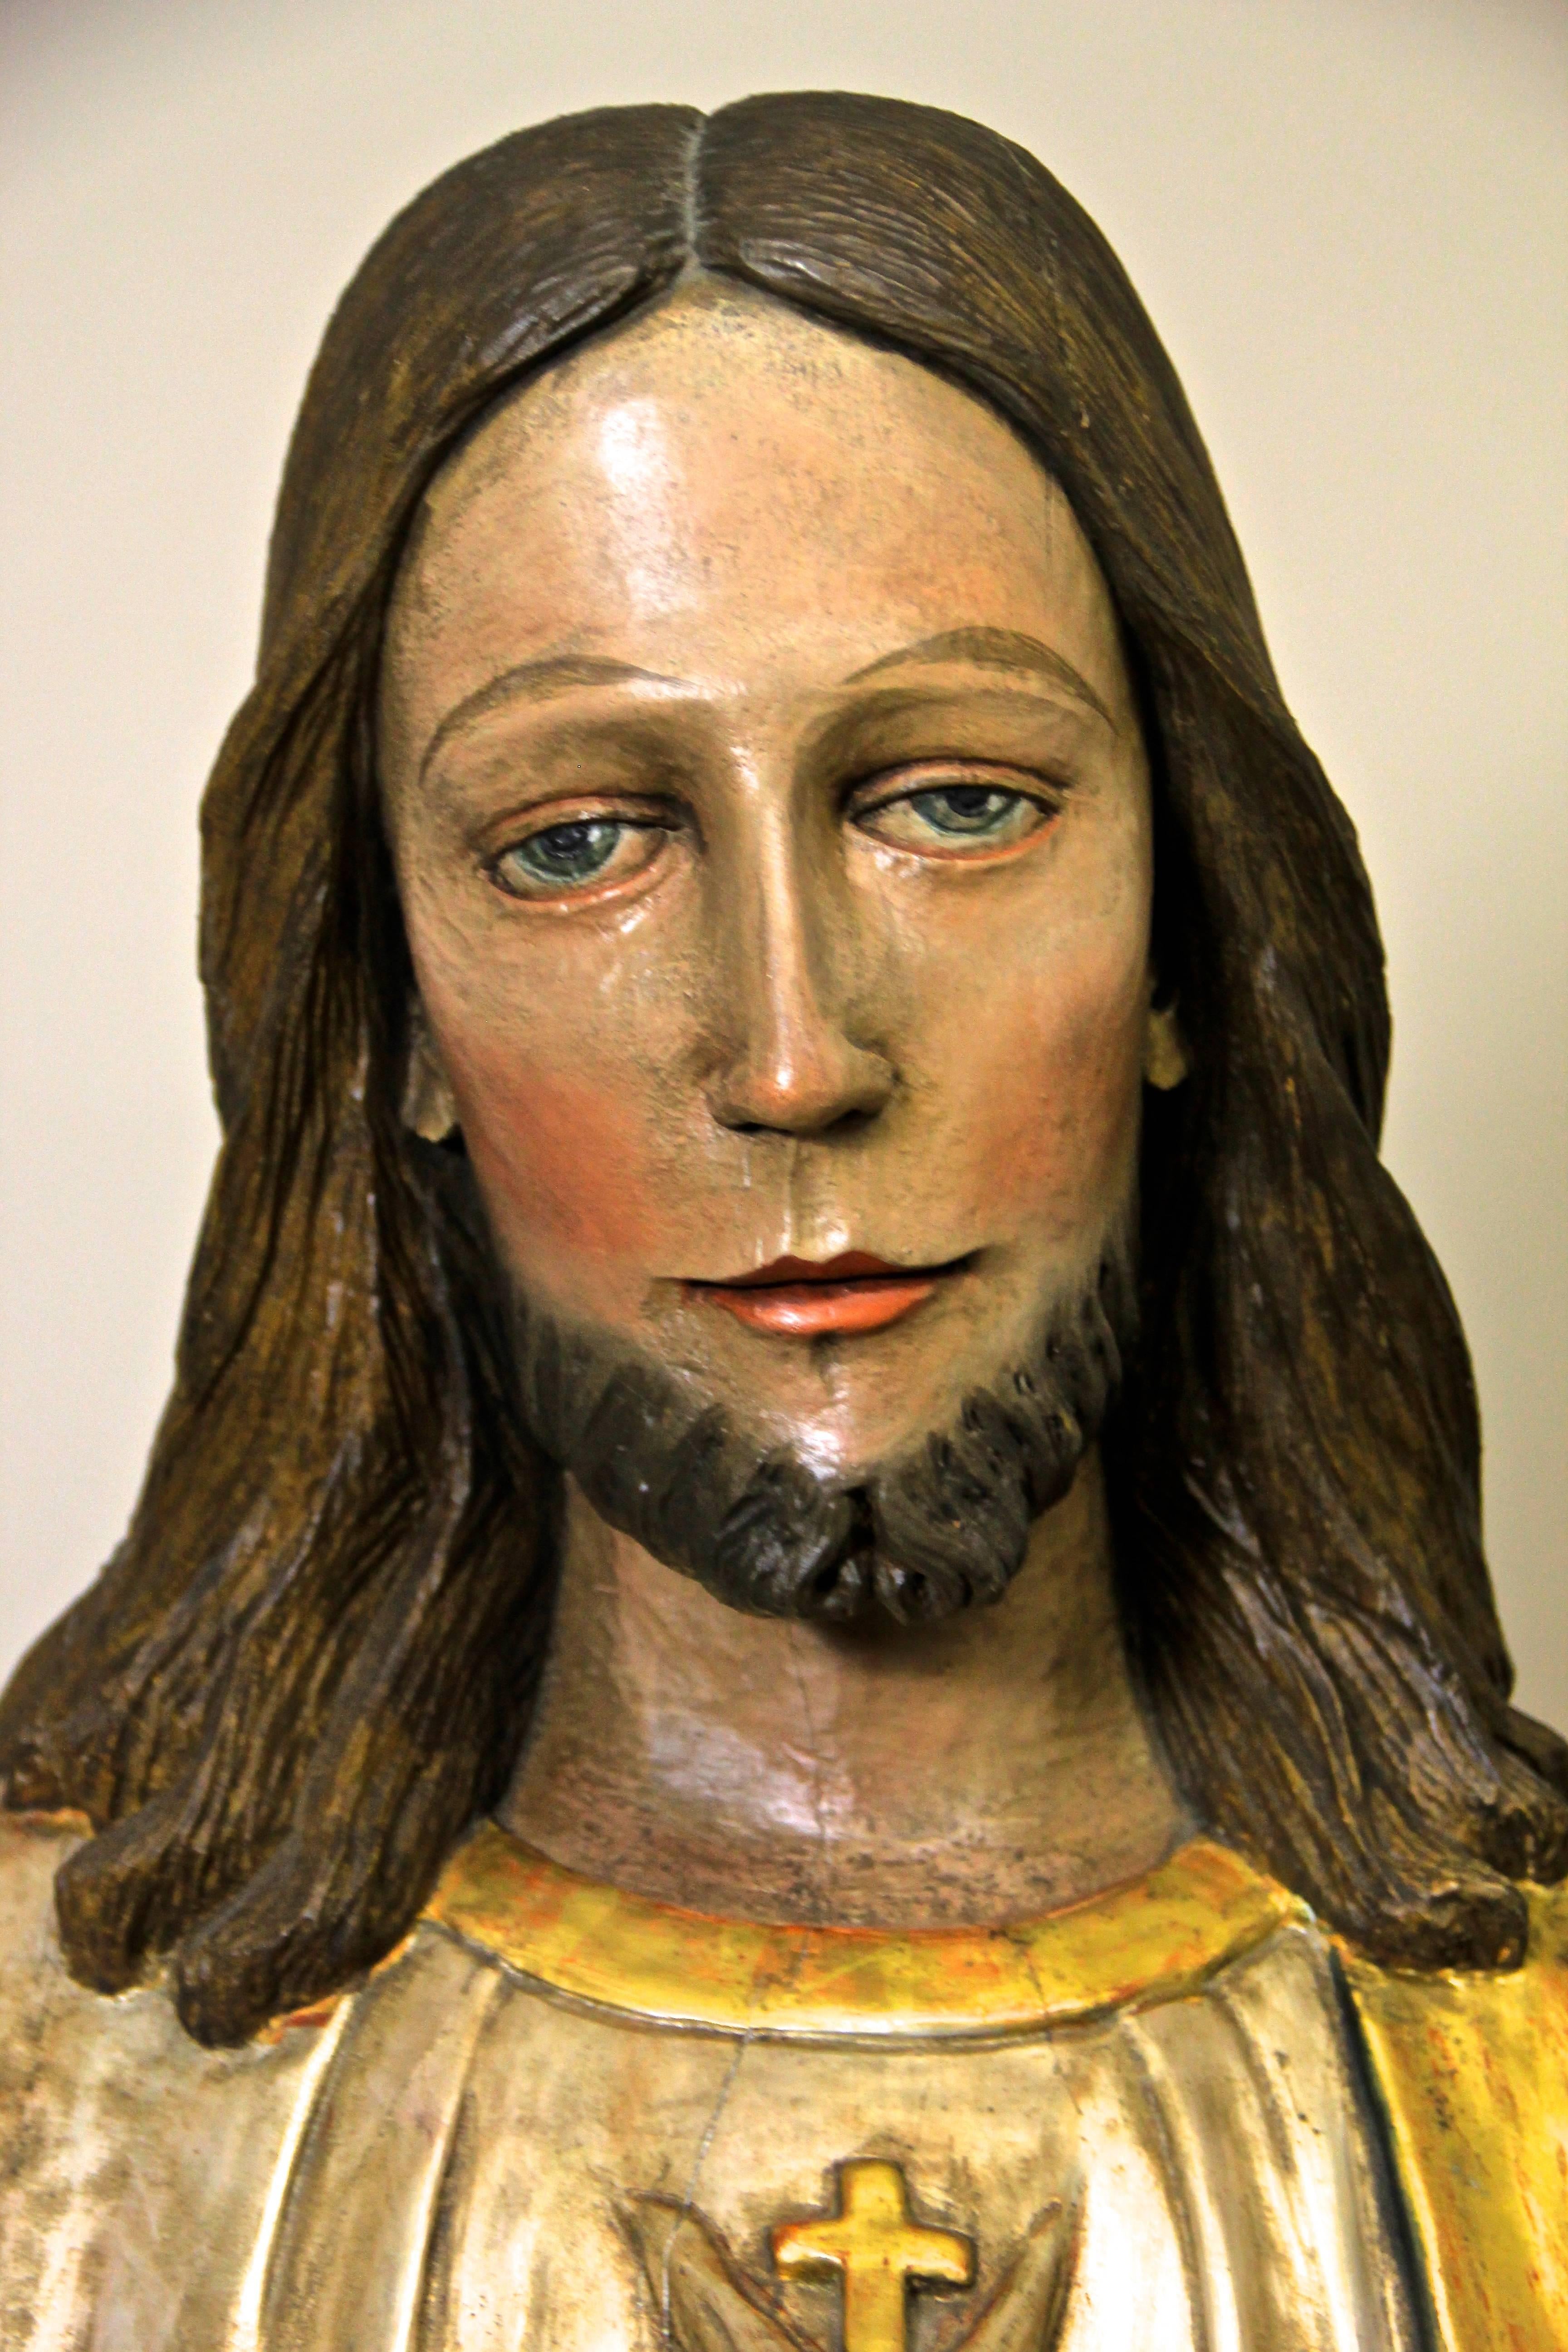 Life-size wooden Saint Statue of Jesus Christ made in Austria, circa first half of the 20th century.
This huge statue shows many fine details and was made with absolute perfection. Using different techniques in combination gold leaf, silver leaf